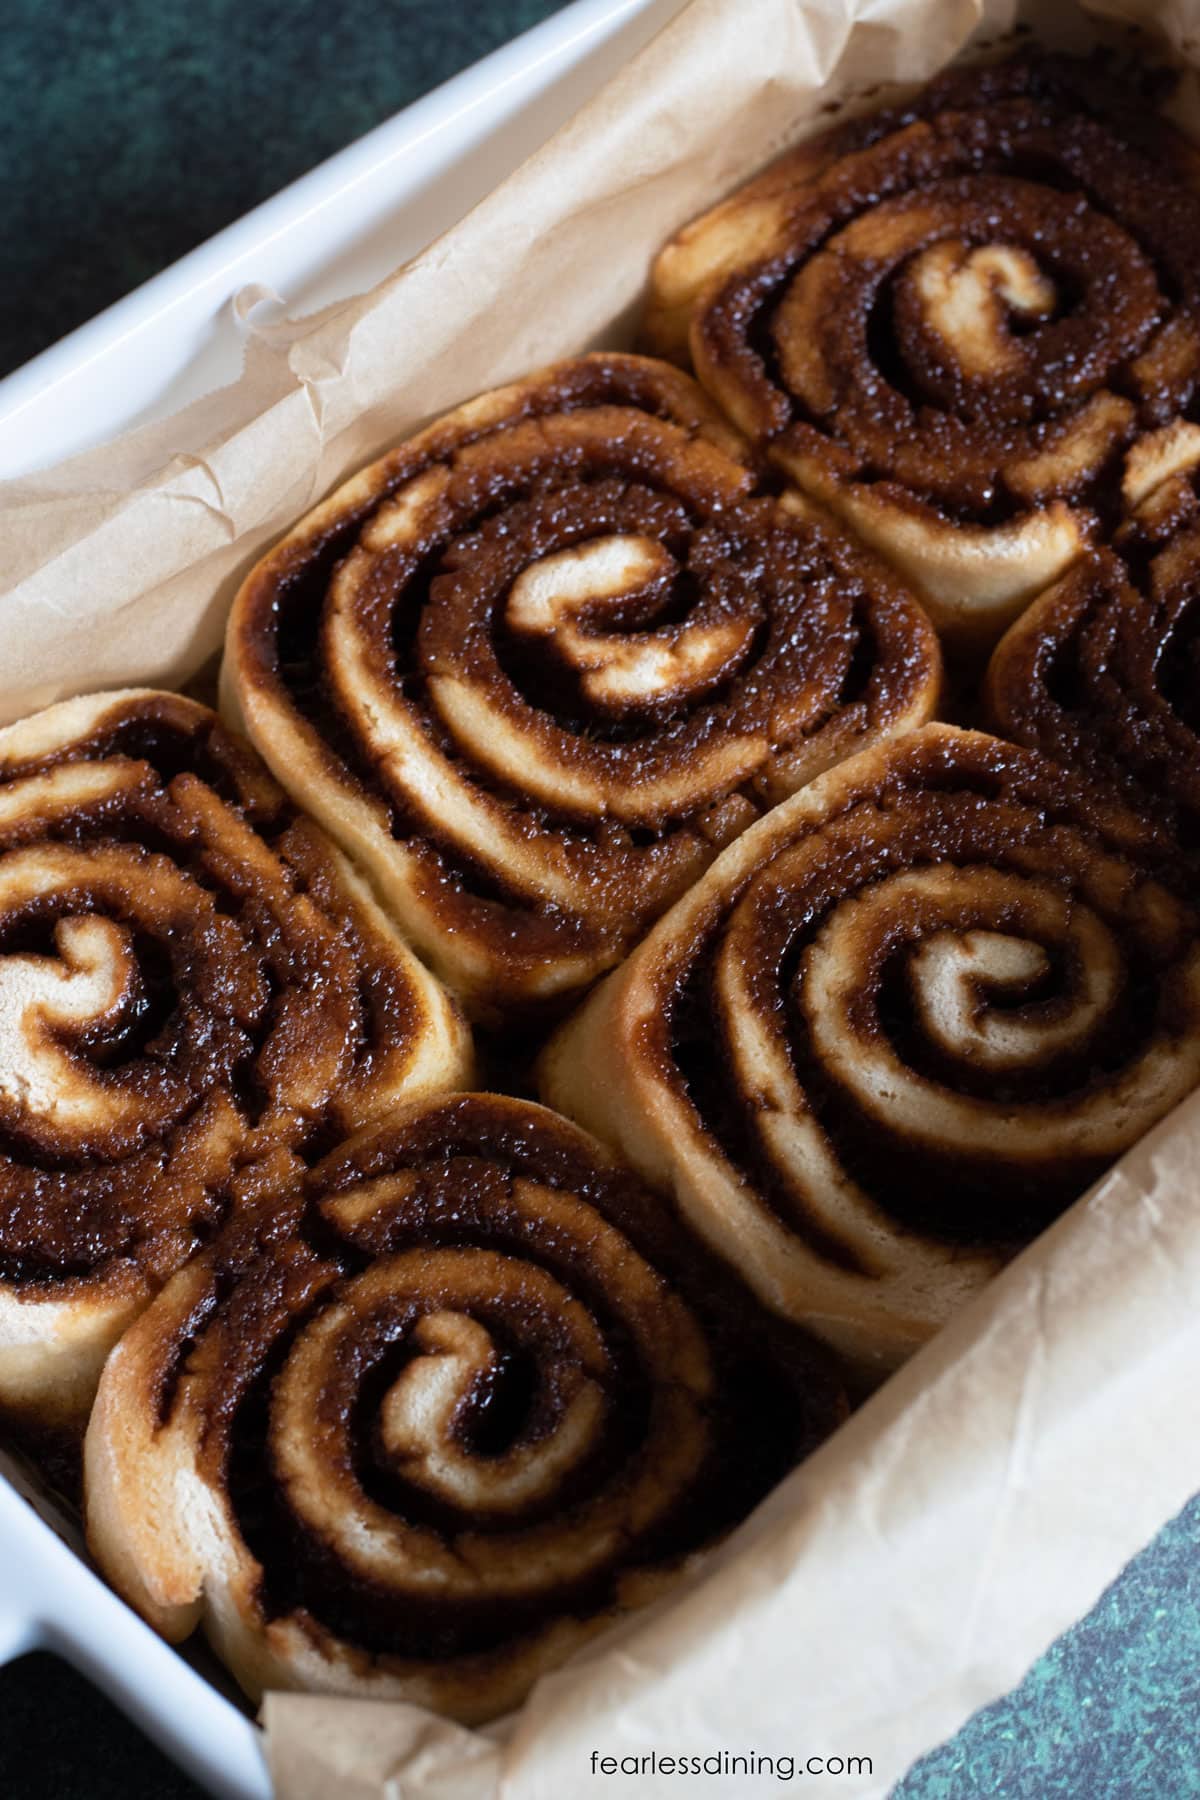 The baked gluten free gingerbread cinnamon rolls in a baking dish.